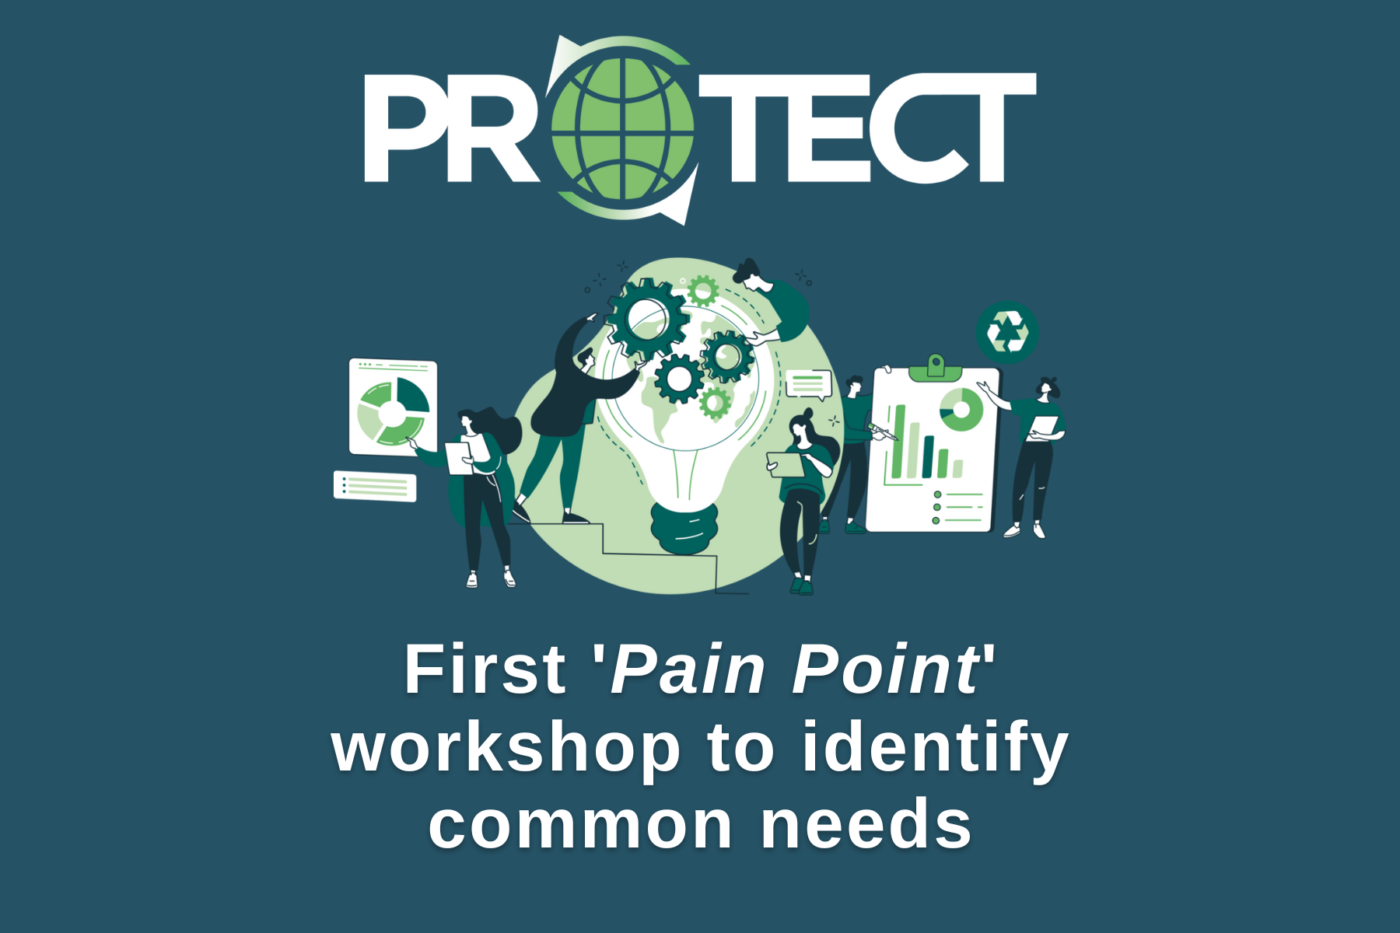 PROTECT PAIN POINT WORKSHOPS